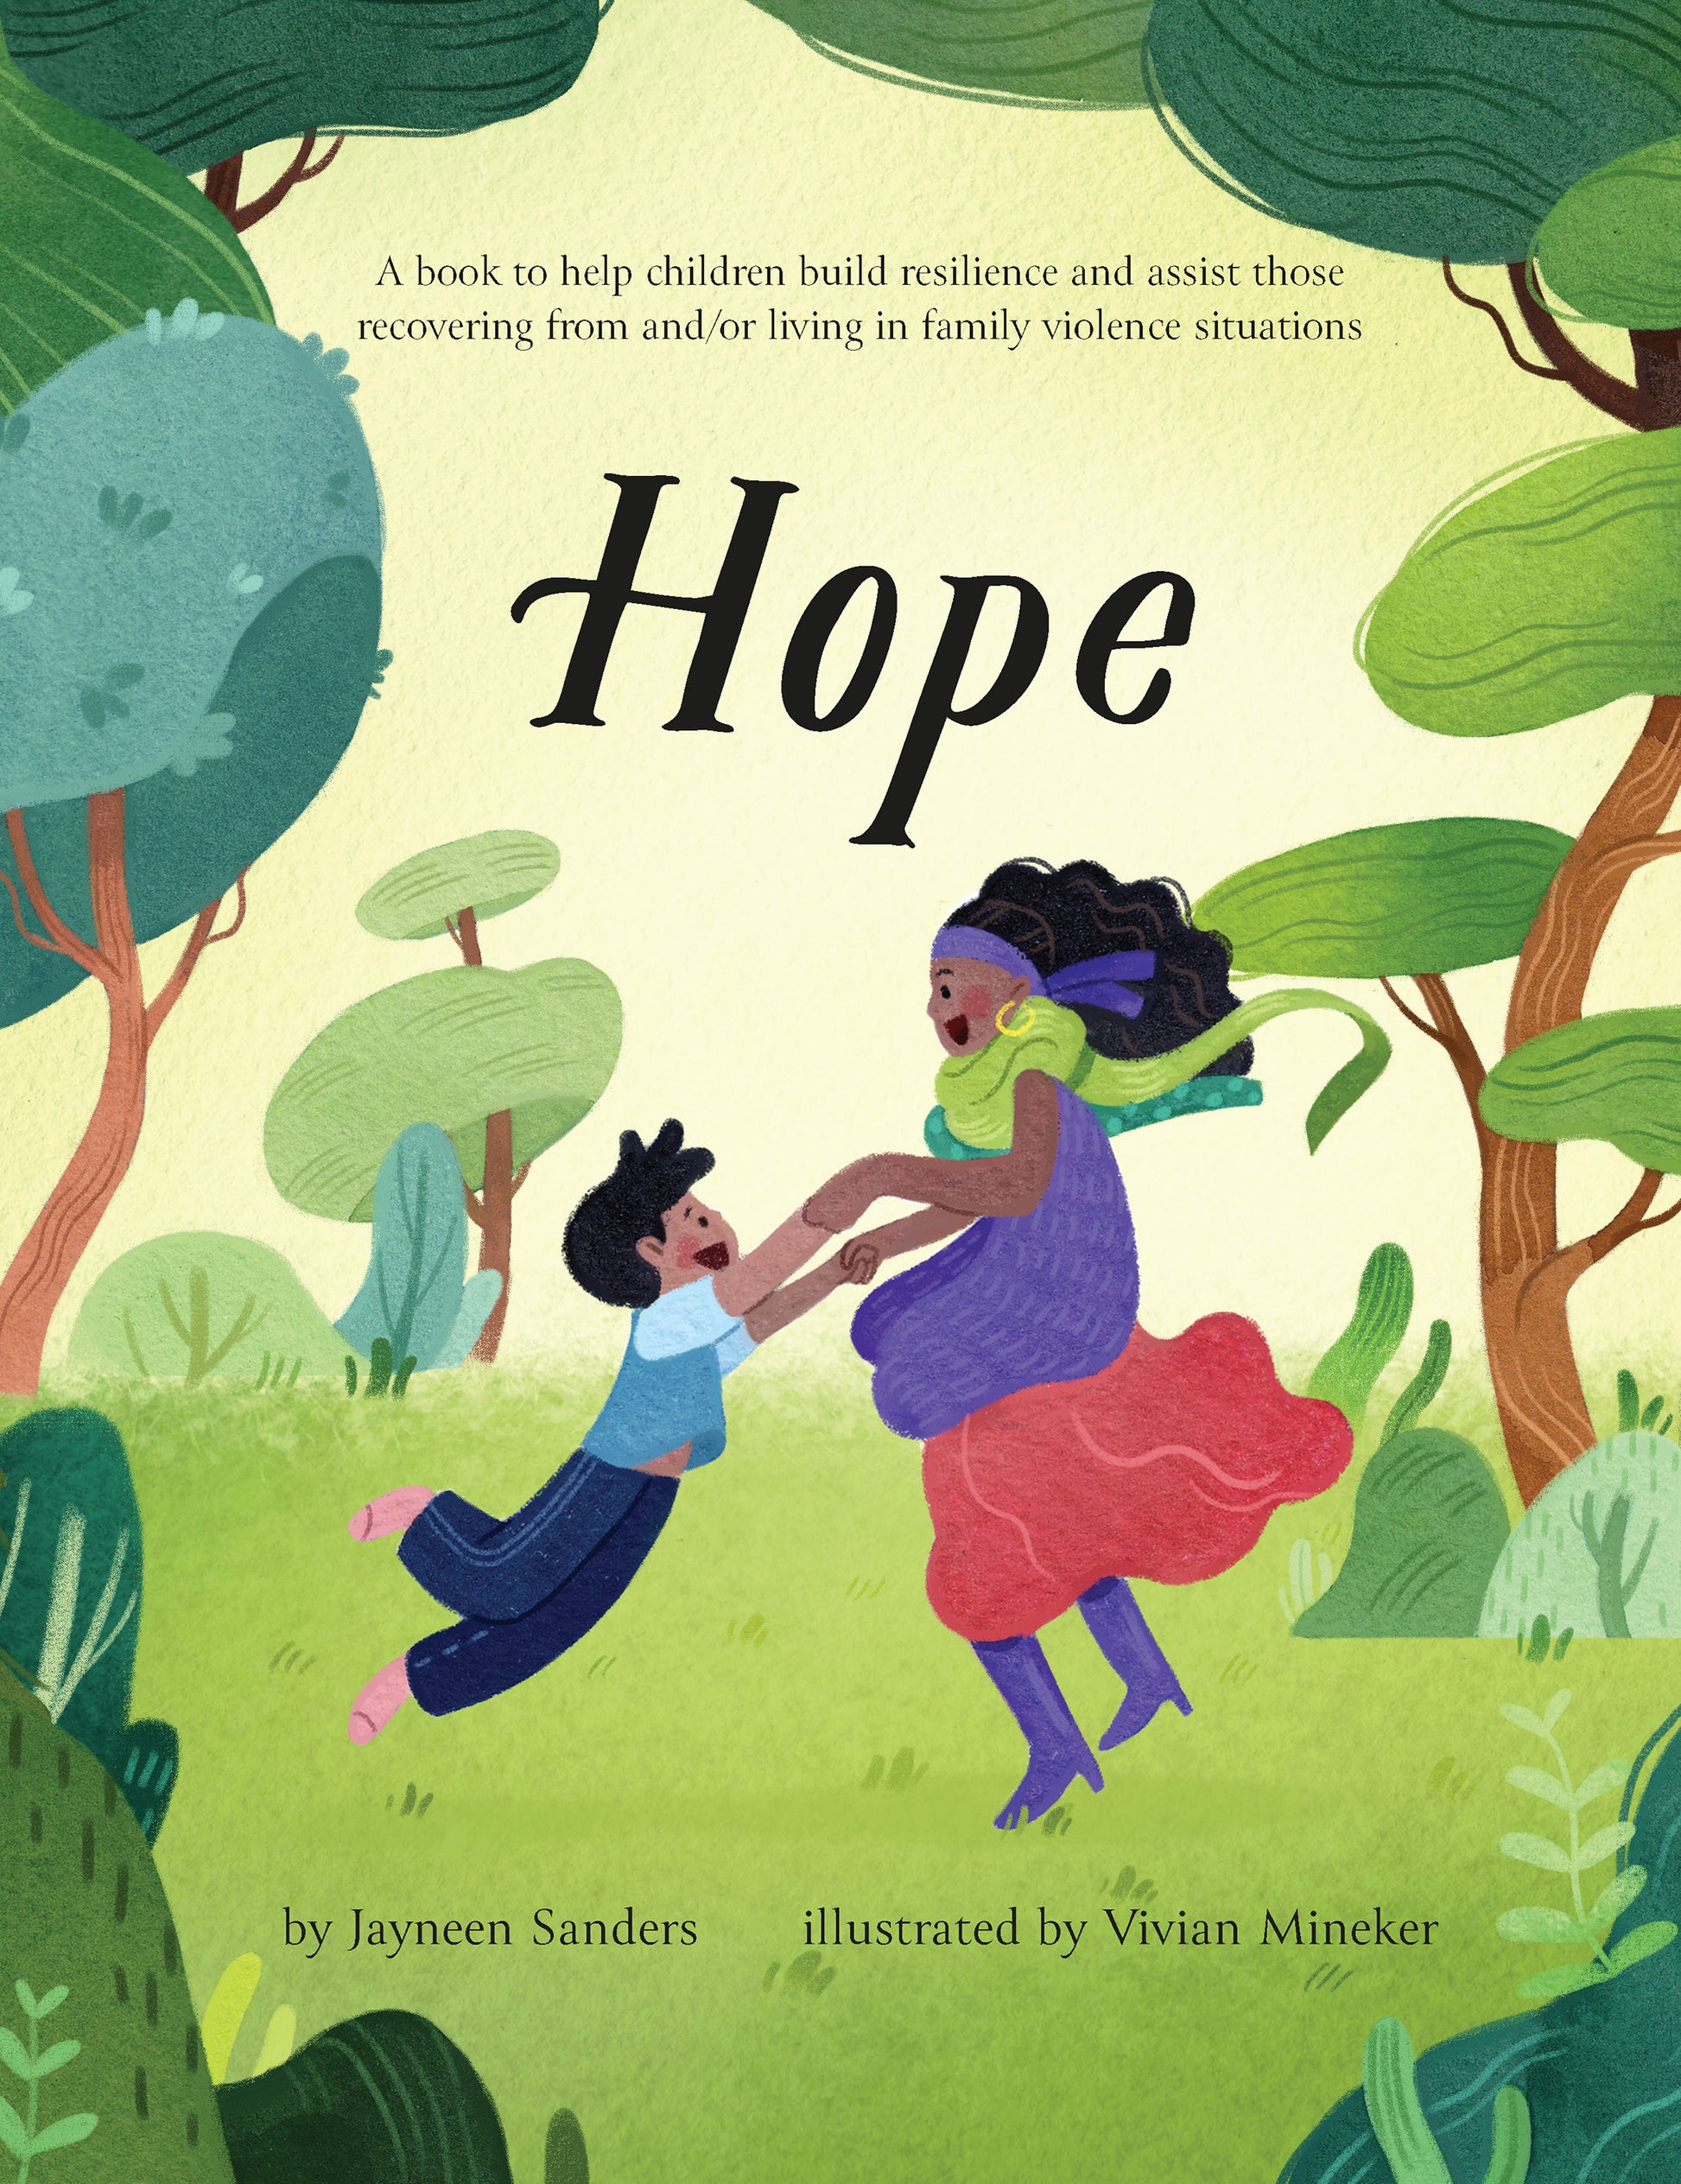 The cover of the book ‘Hope’ by Jayneen Sanders.